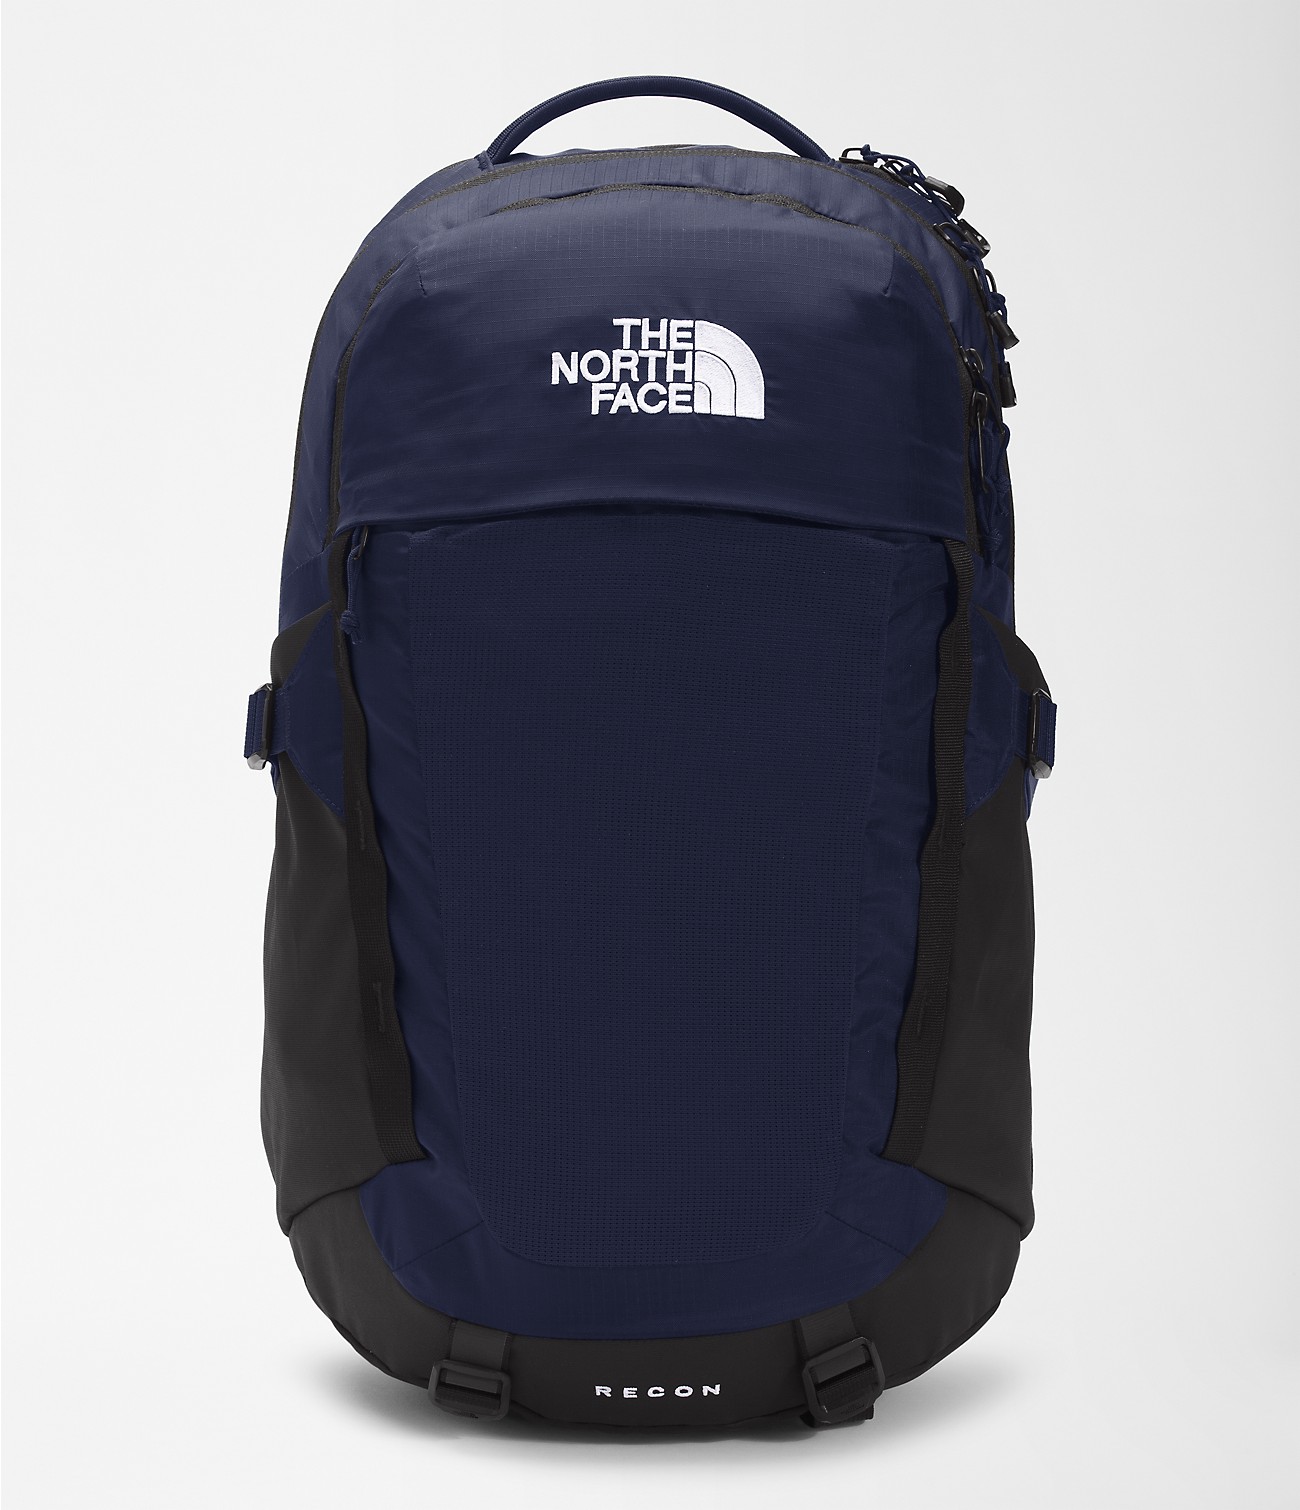 Unlock Wilderness' choice in the Herschel Vs North Face comparison, the Recon Backpack by The North Face